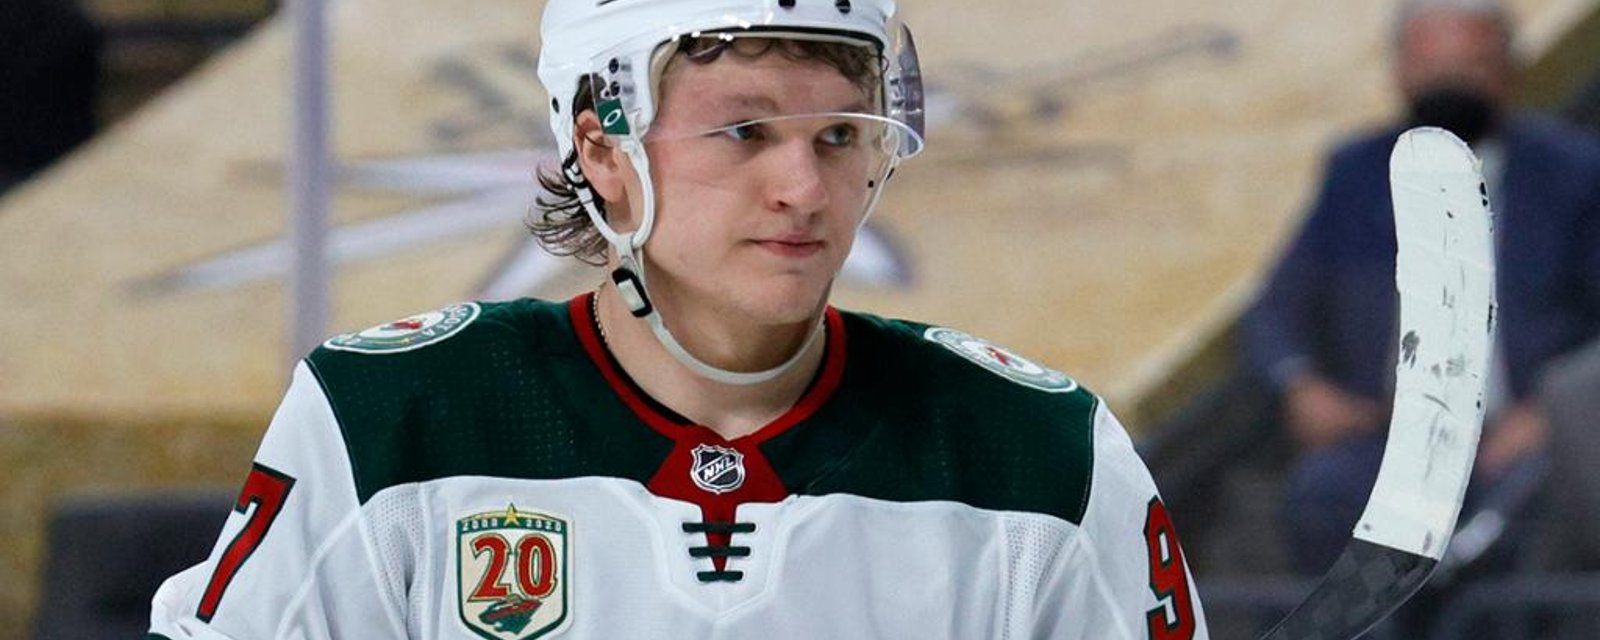 Kirill Kaprizov reportedly turned down massive $72 million offer from the Wild